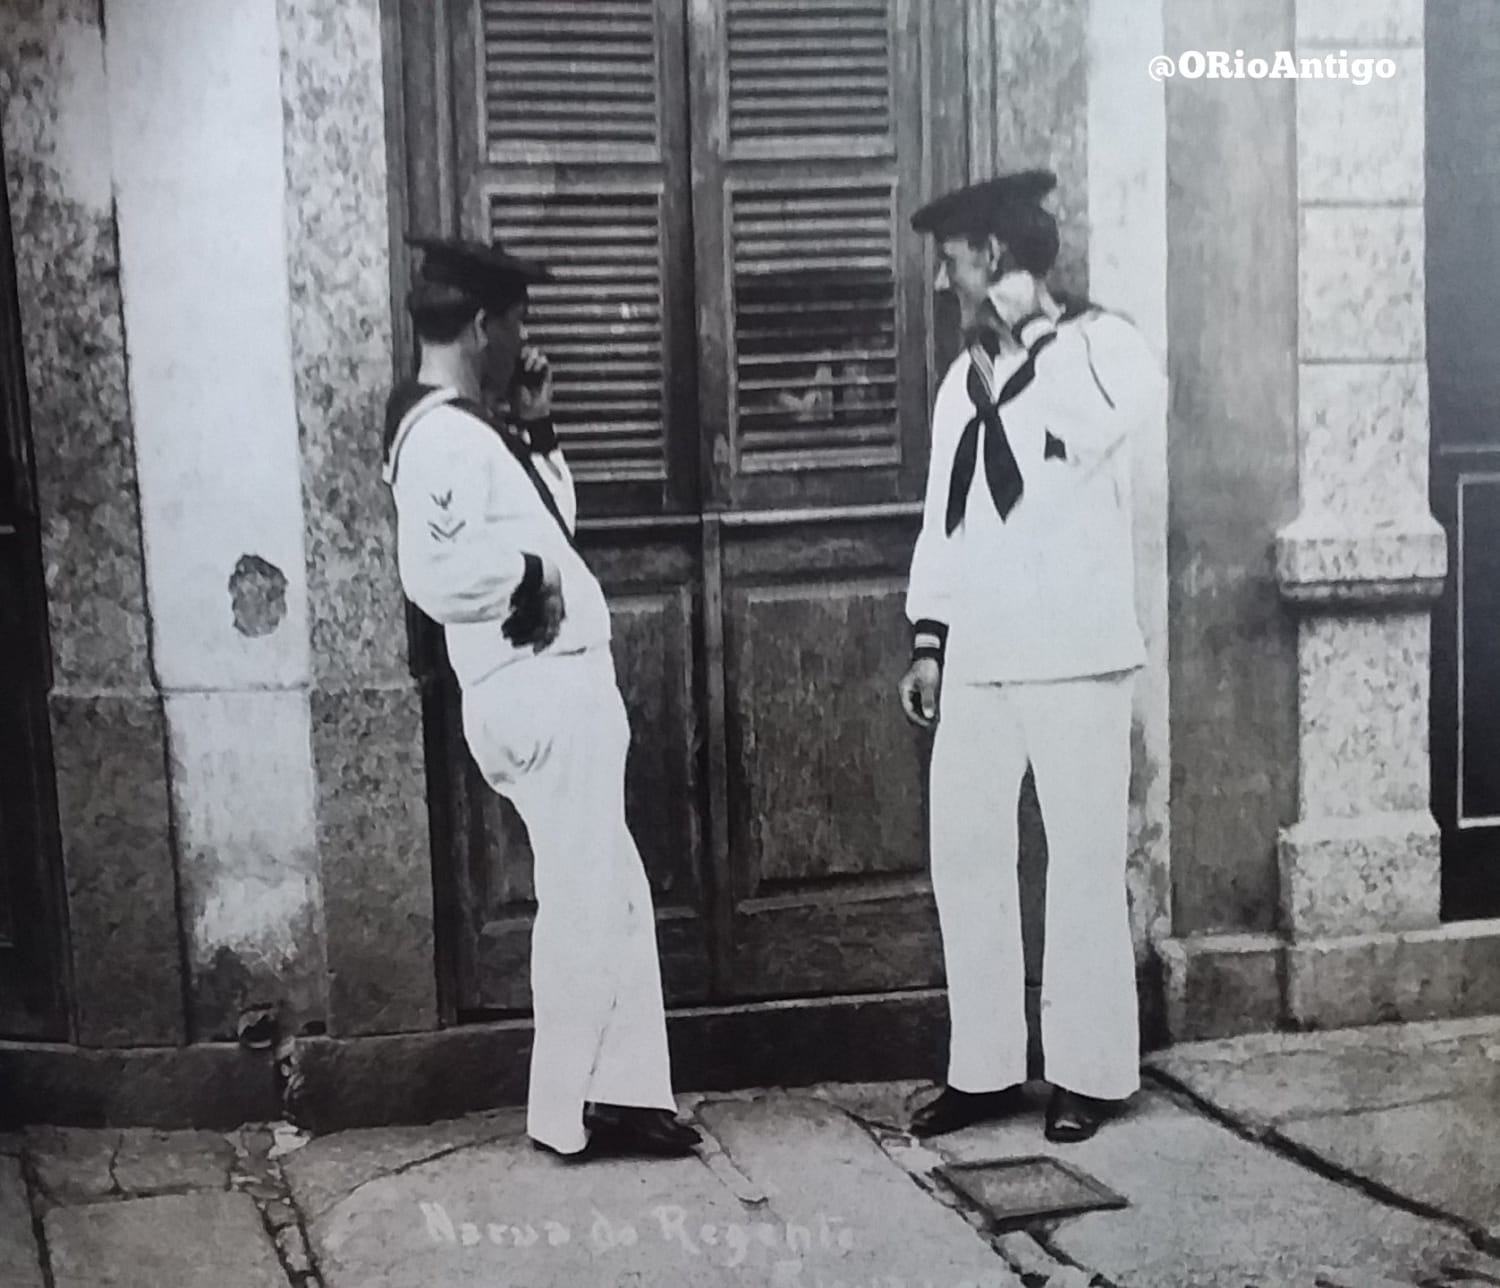 Two american sailors at the door of the brothel on Rio de Janeiro. Later, one of the soldiers called the photographer into a fight. 01/13/1906. Photo: Augusto Malta